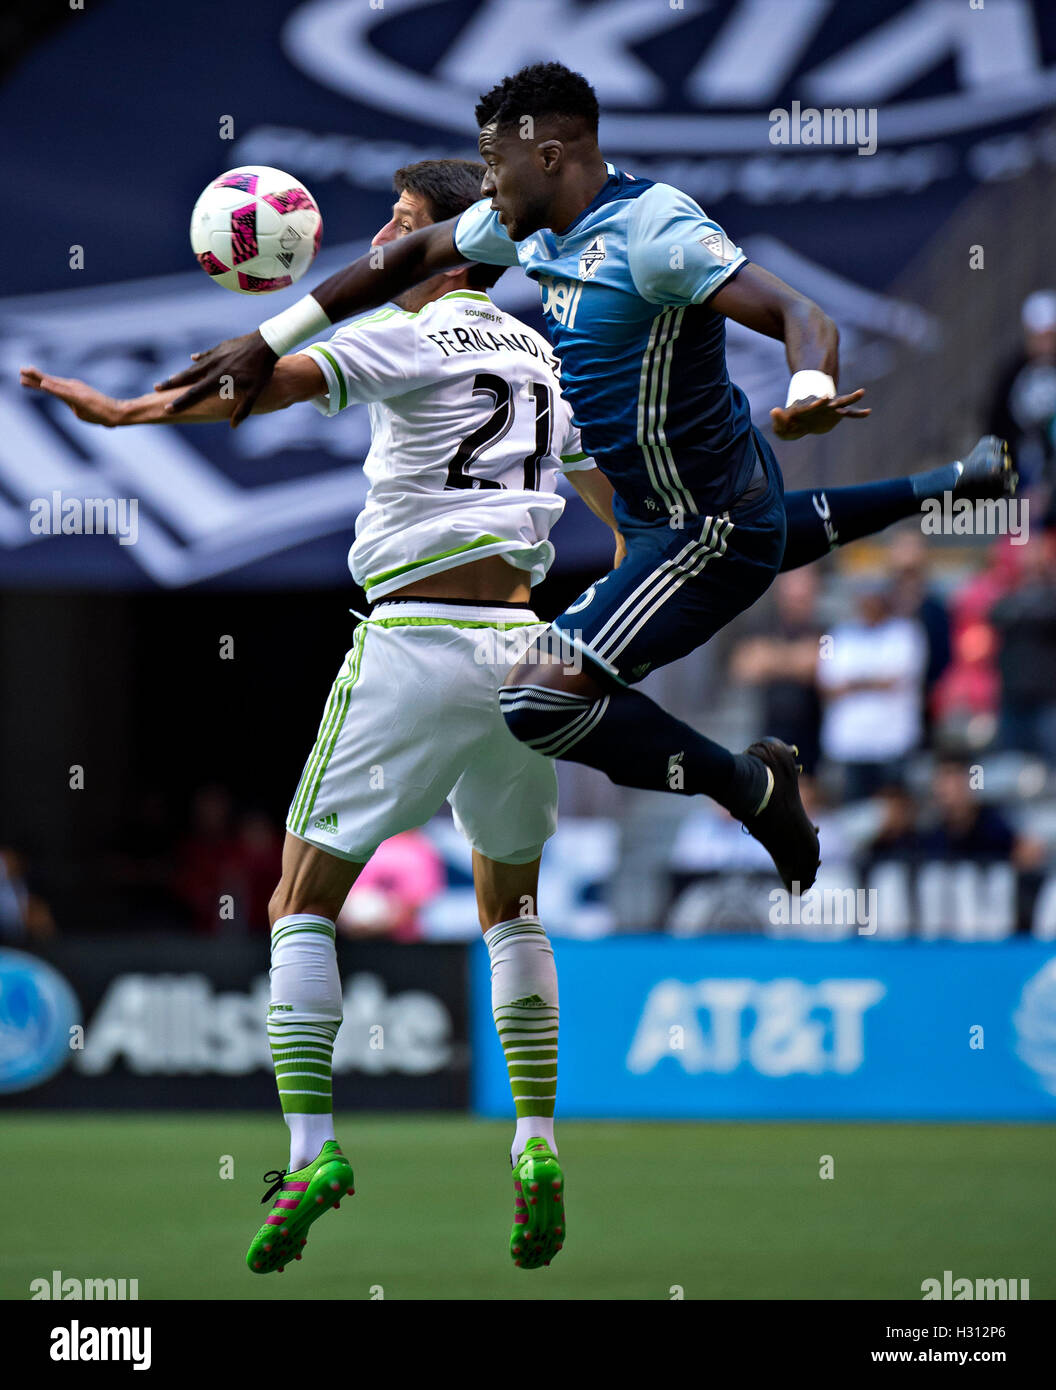 Vancouver, Canada. 2nd Oct, 2016. Seattle Sounders FC's Alvaro Fernandez (L) vies with Vancouver Whitecaps' Jordan Smith during the Major League Soccer (MLS) in Vancouver, Canada, on Oct. 2, 2016. Vancouver Whitecaps lost 1-2. Credit:  Andrew Soong/Xinhua/Alamy Live News Stock Photo